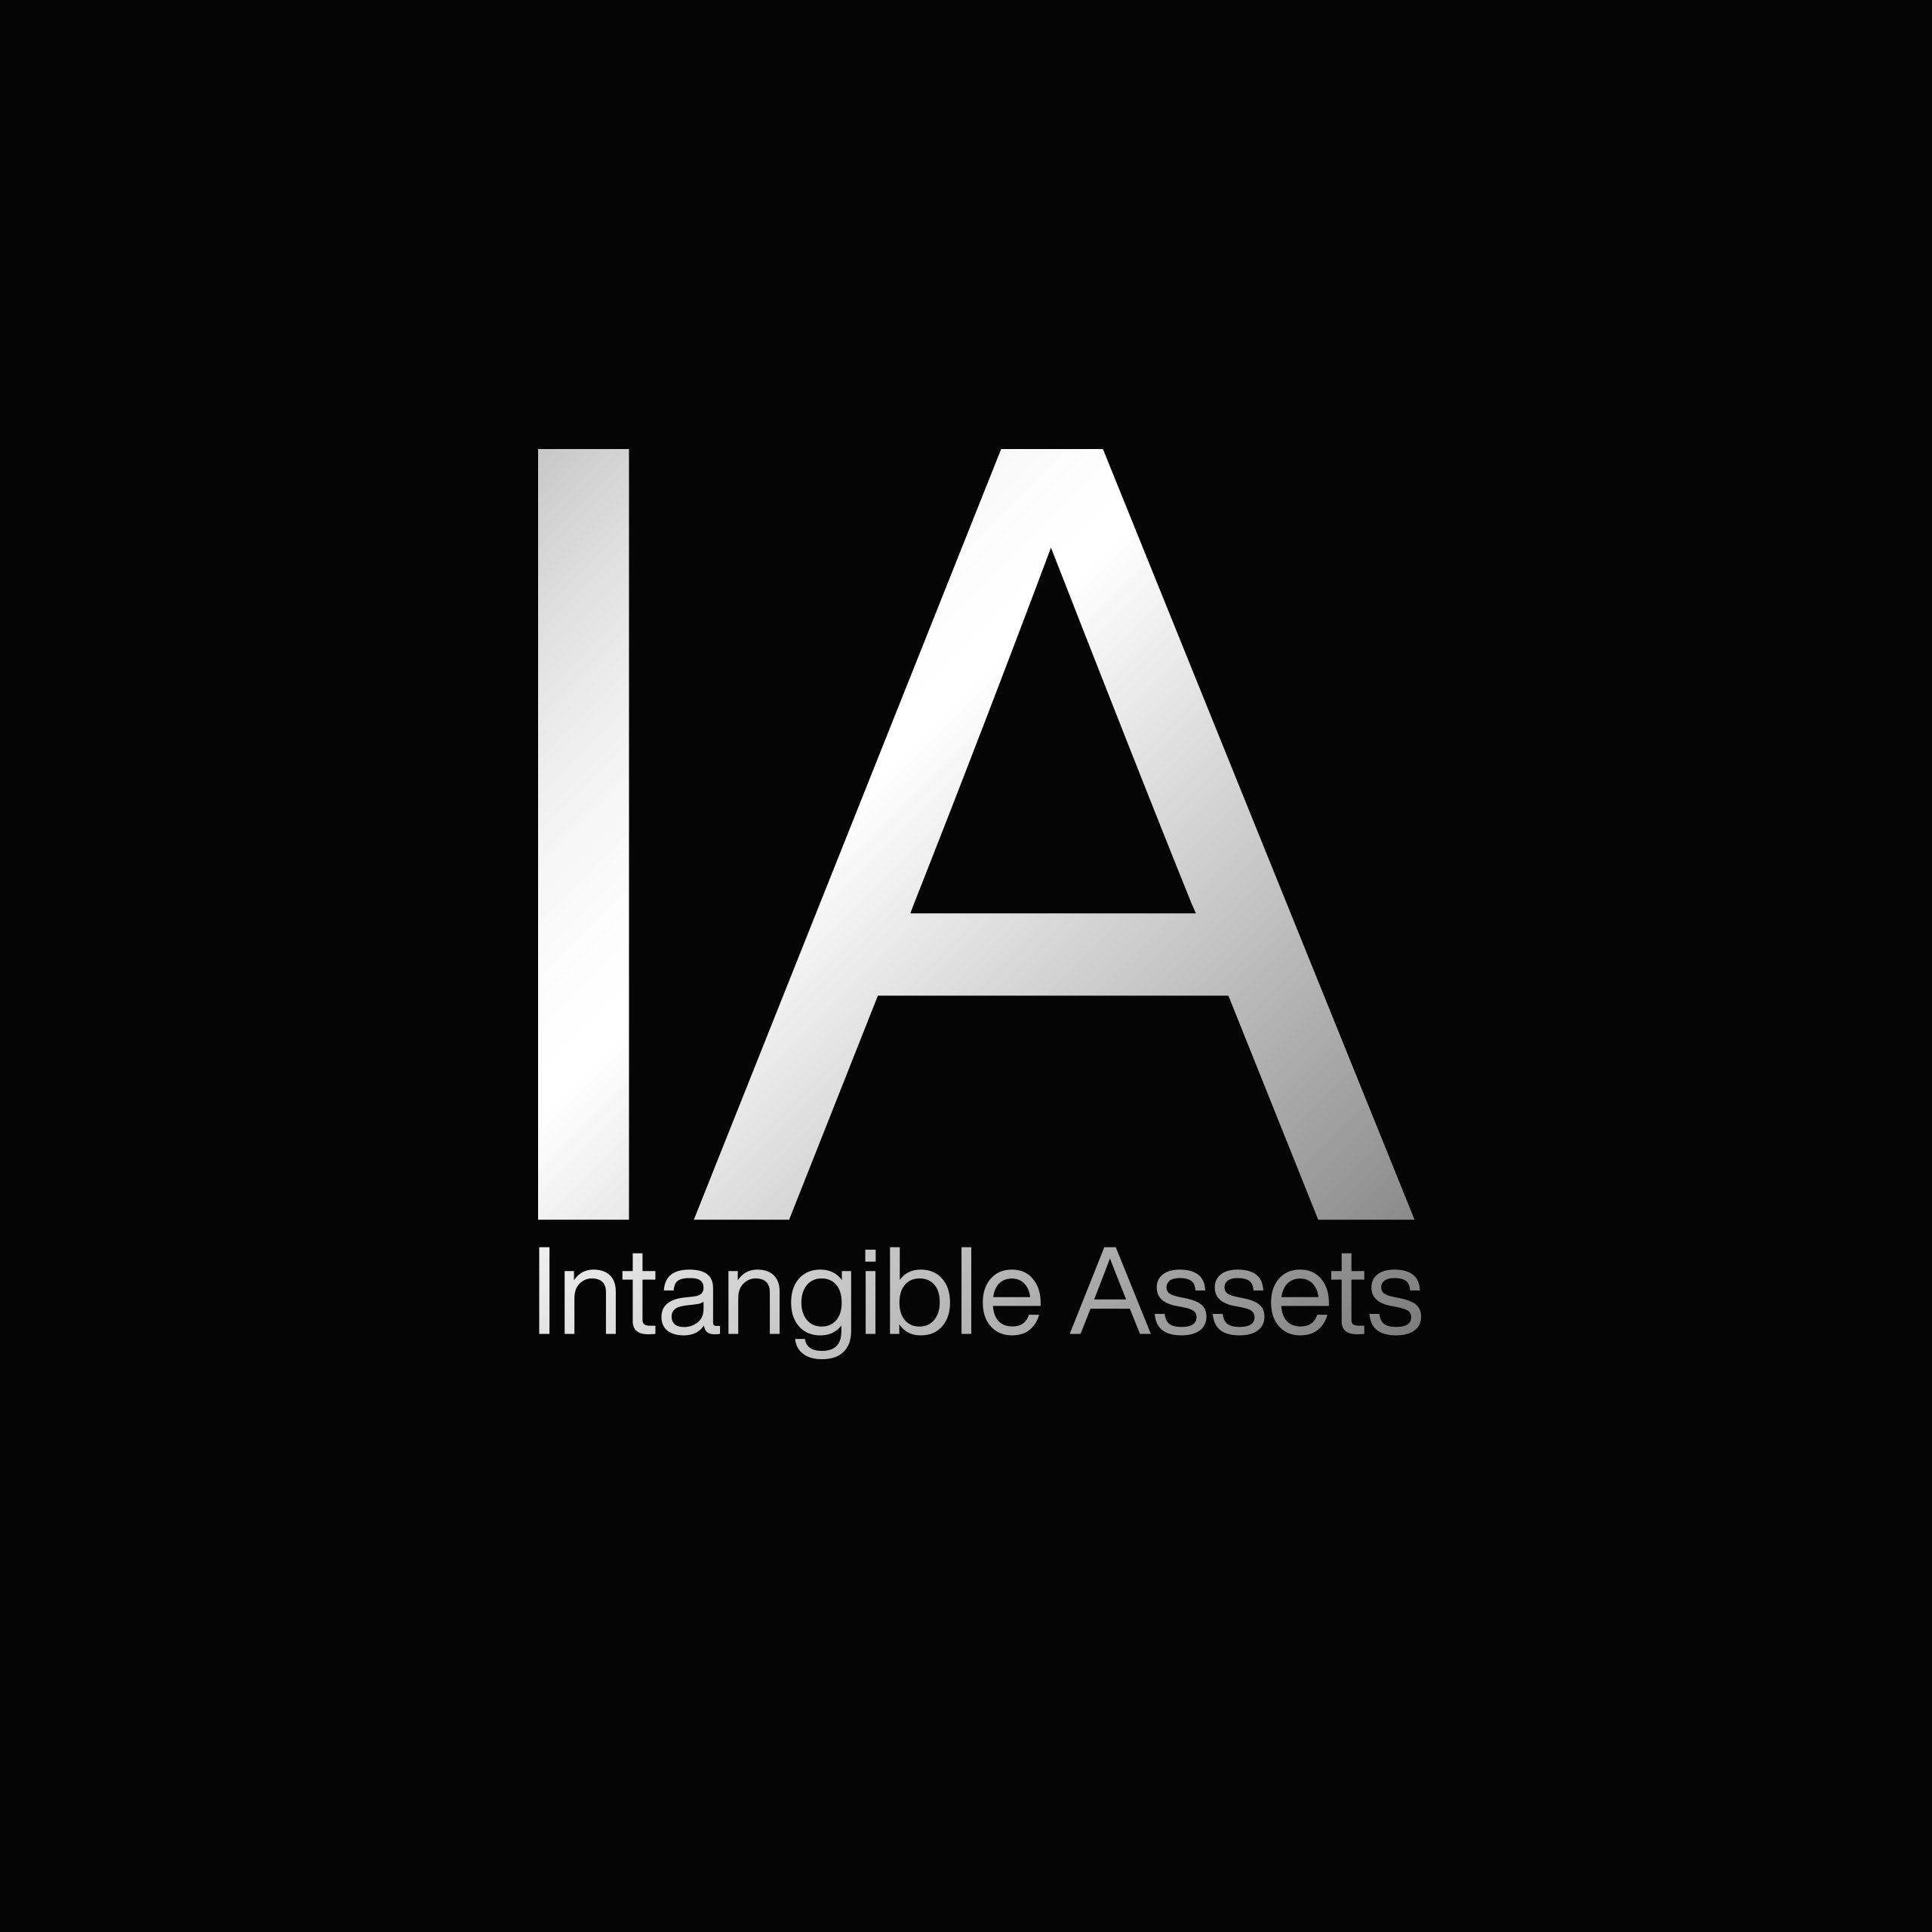 Intangible Assets Logo